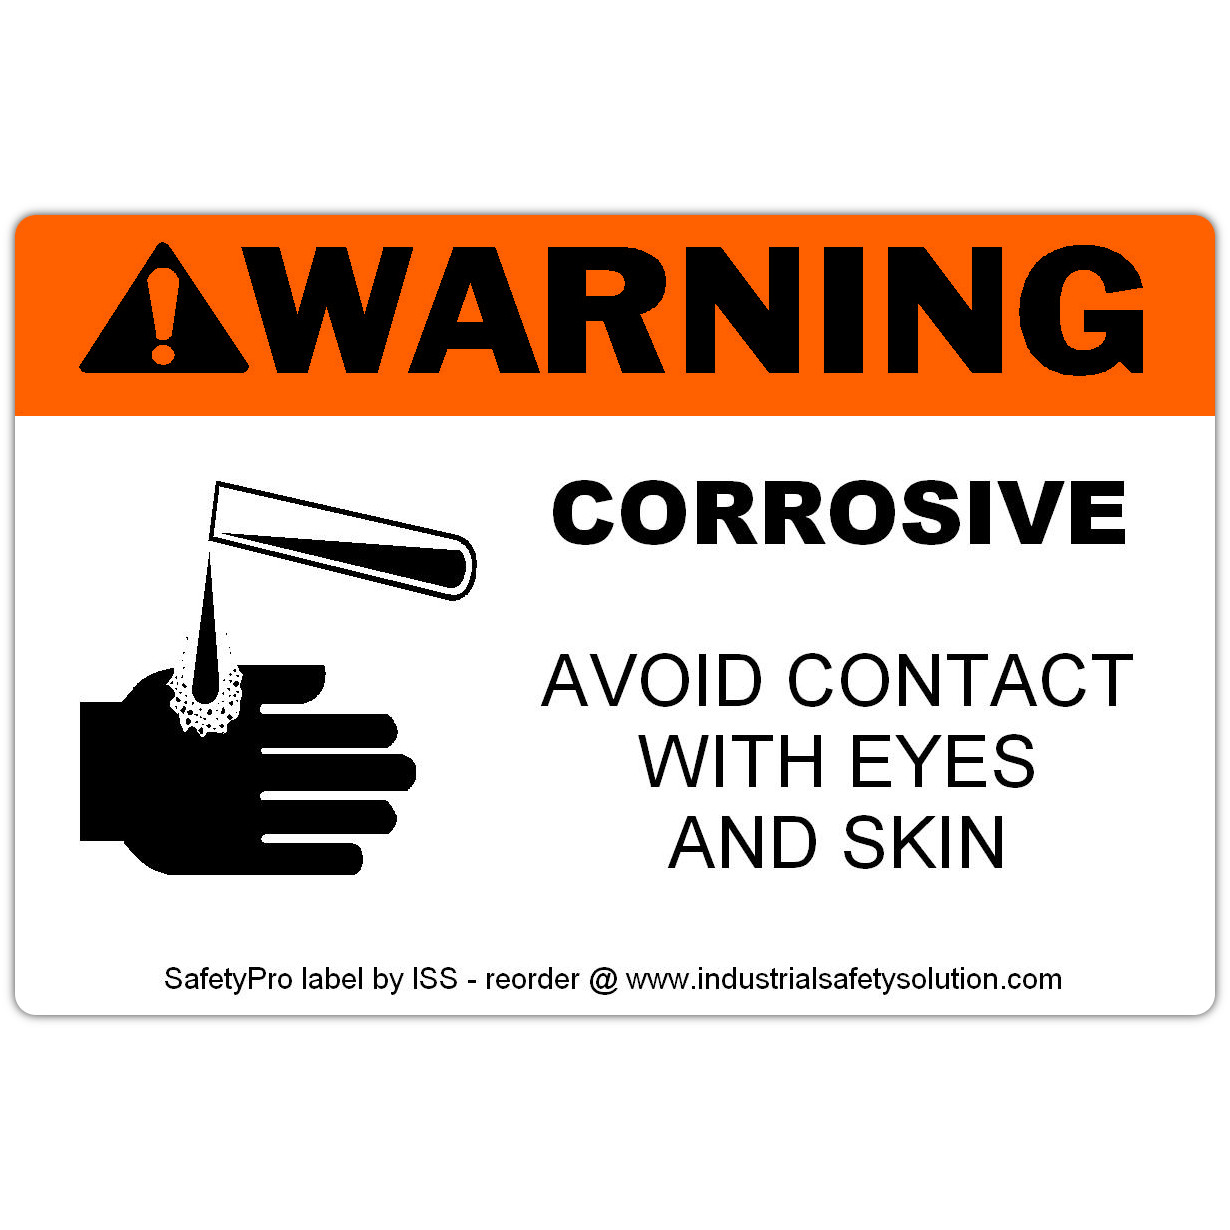 Ask a question about 4" x 6" WARNING Corrosive Safety Label